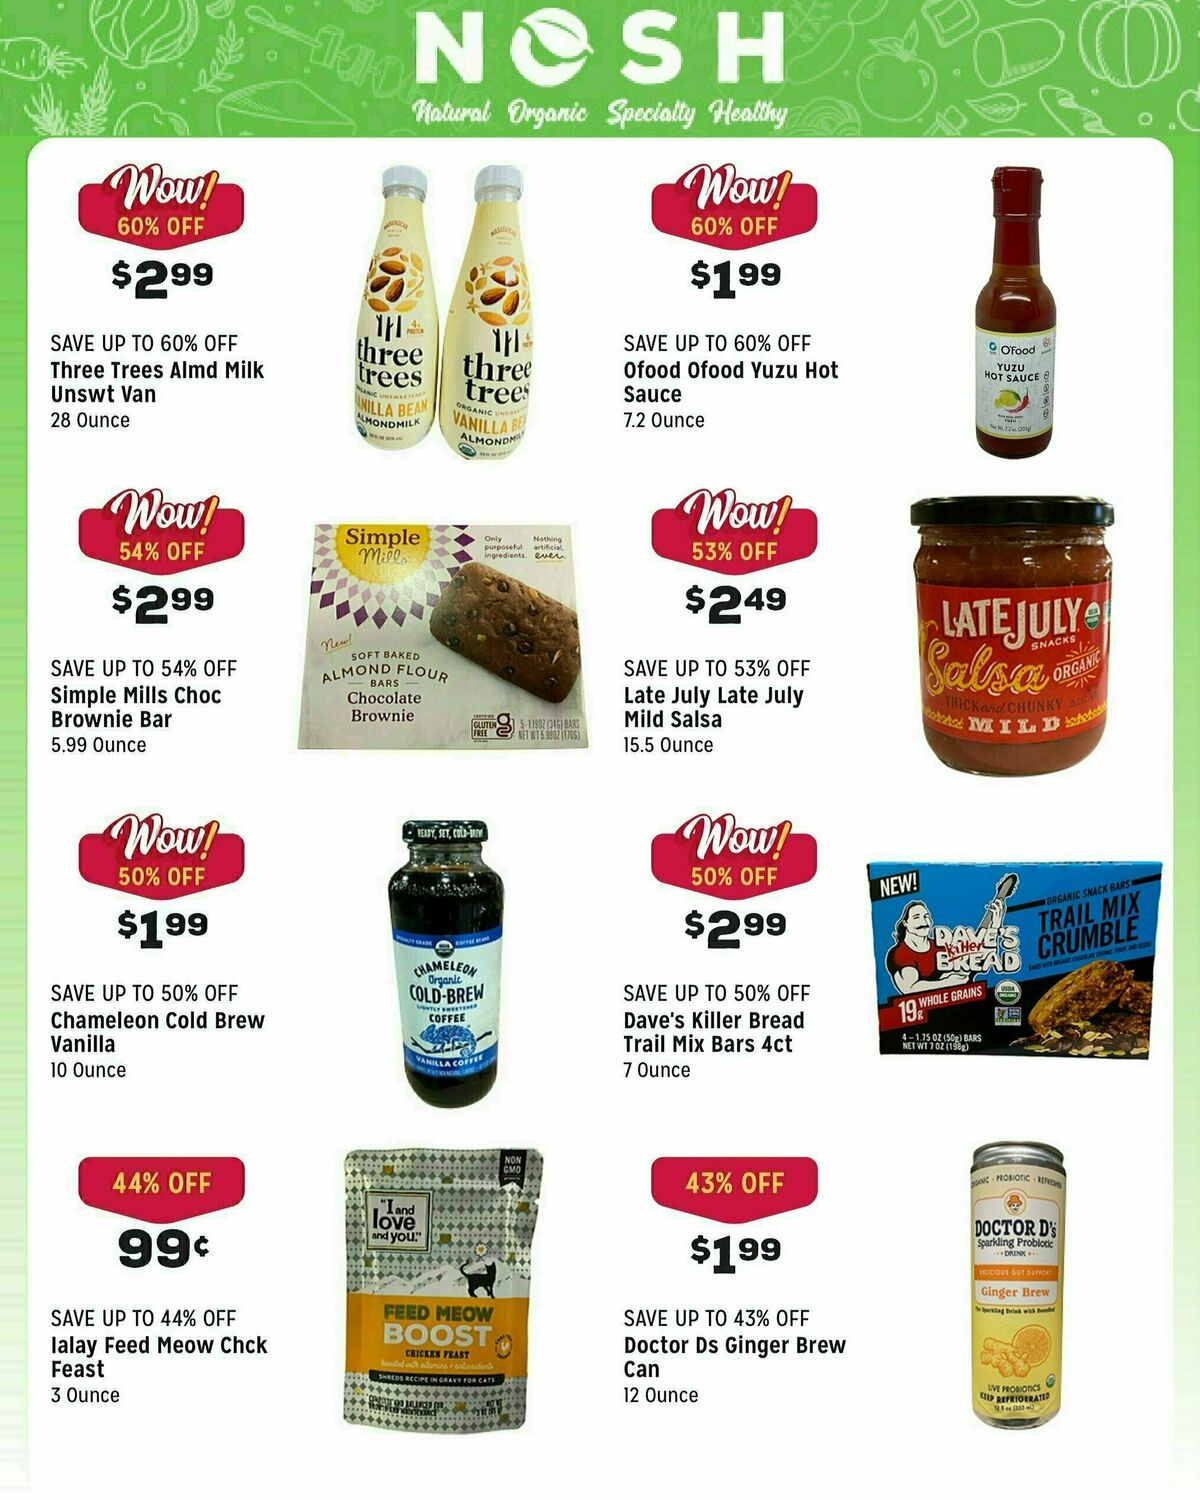 Grocery Outlet Weekly Ad from April 3